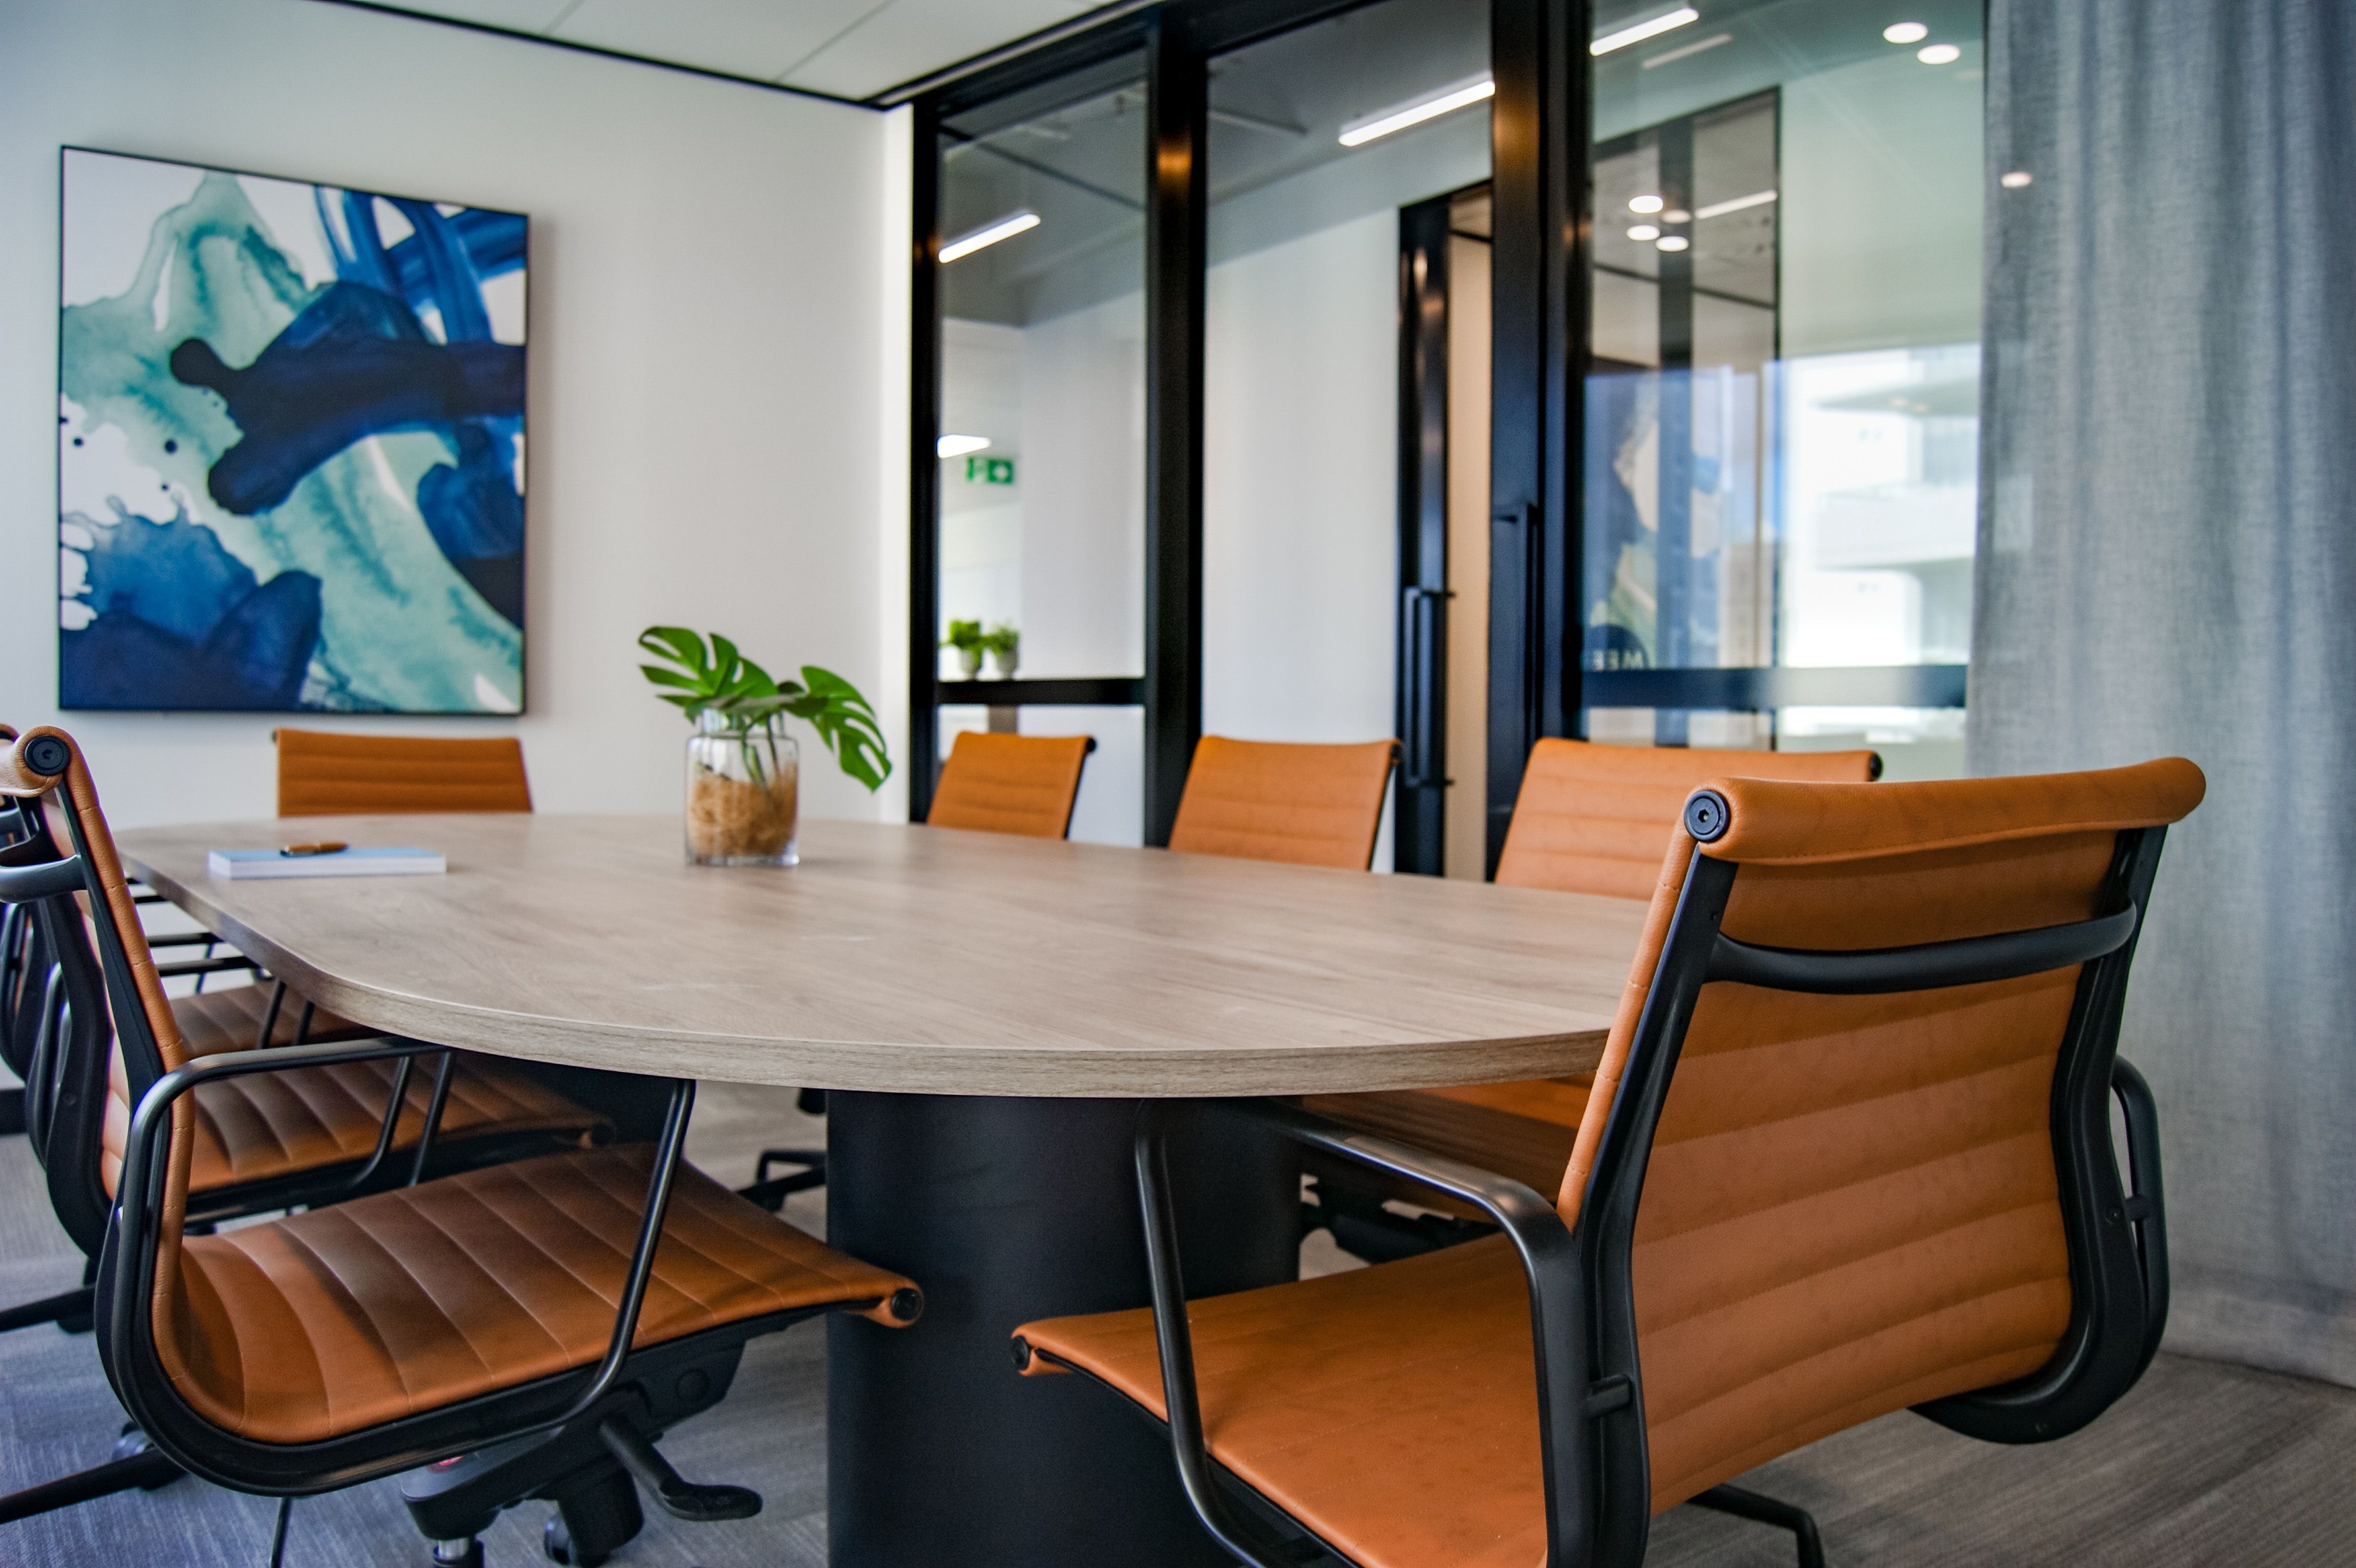 A picture of a conference room in a shared office space building.